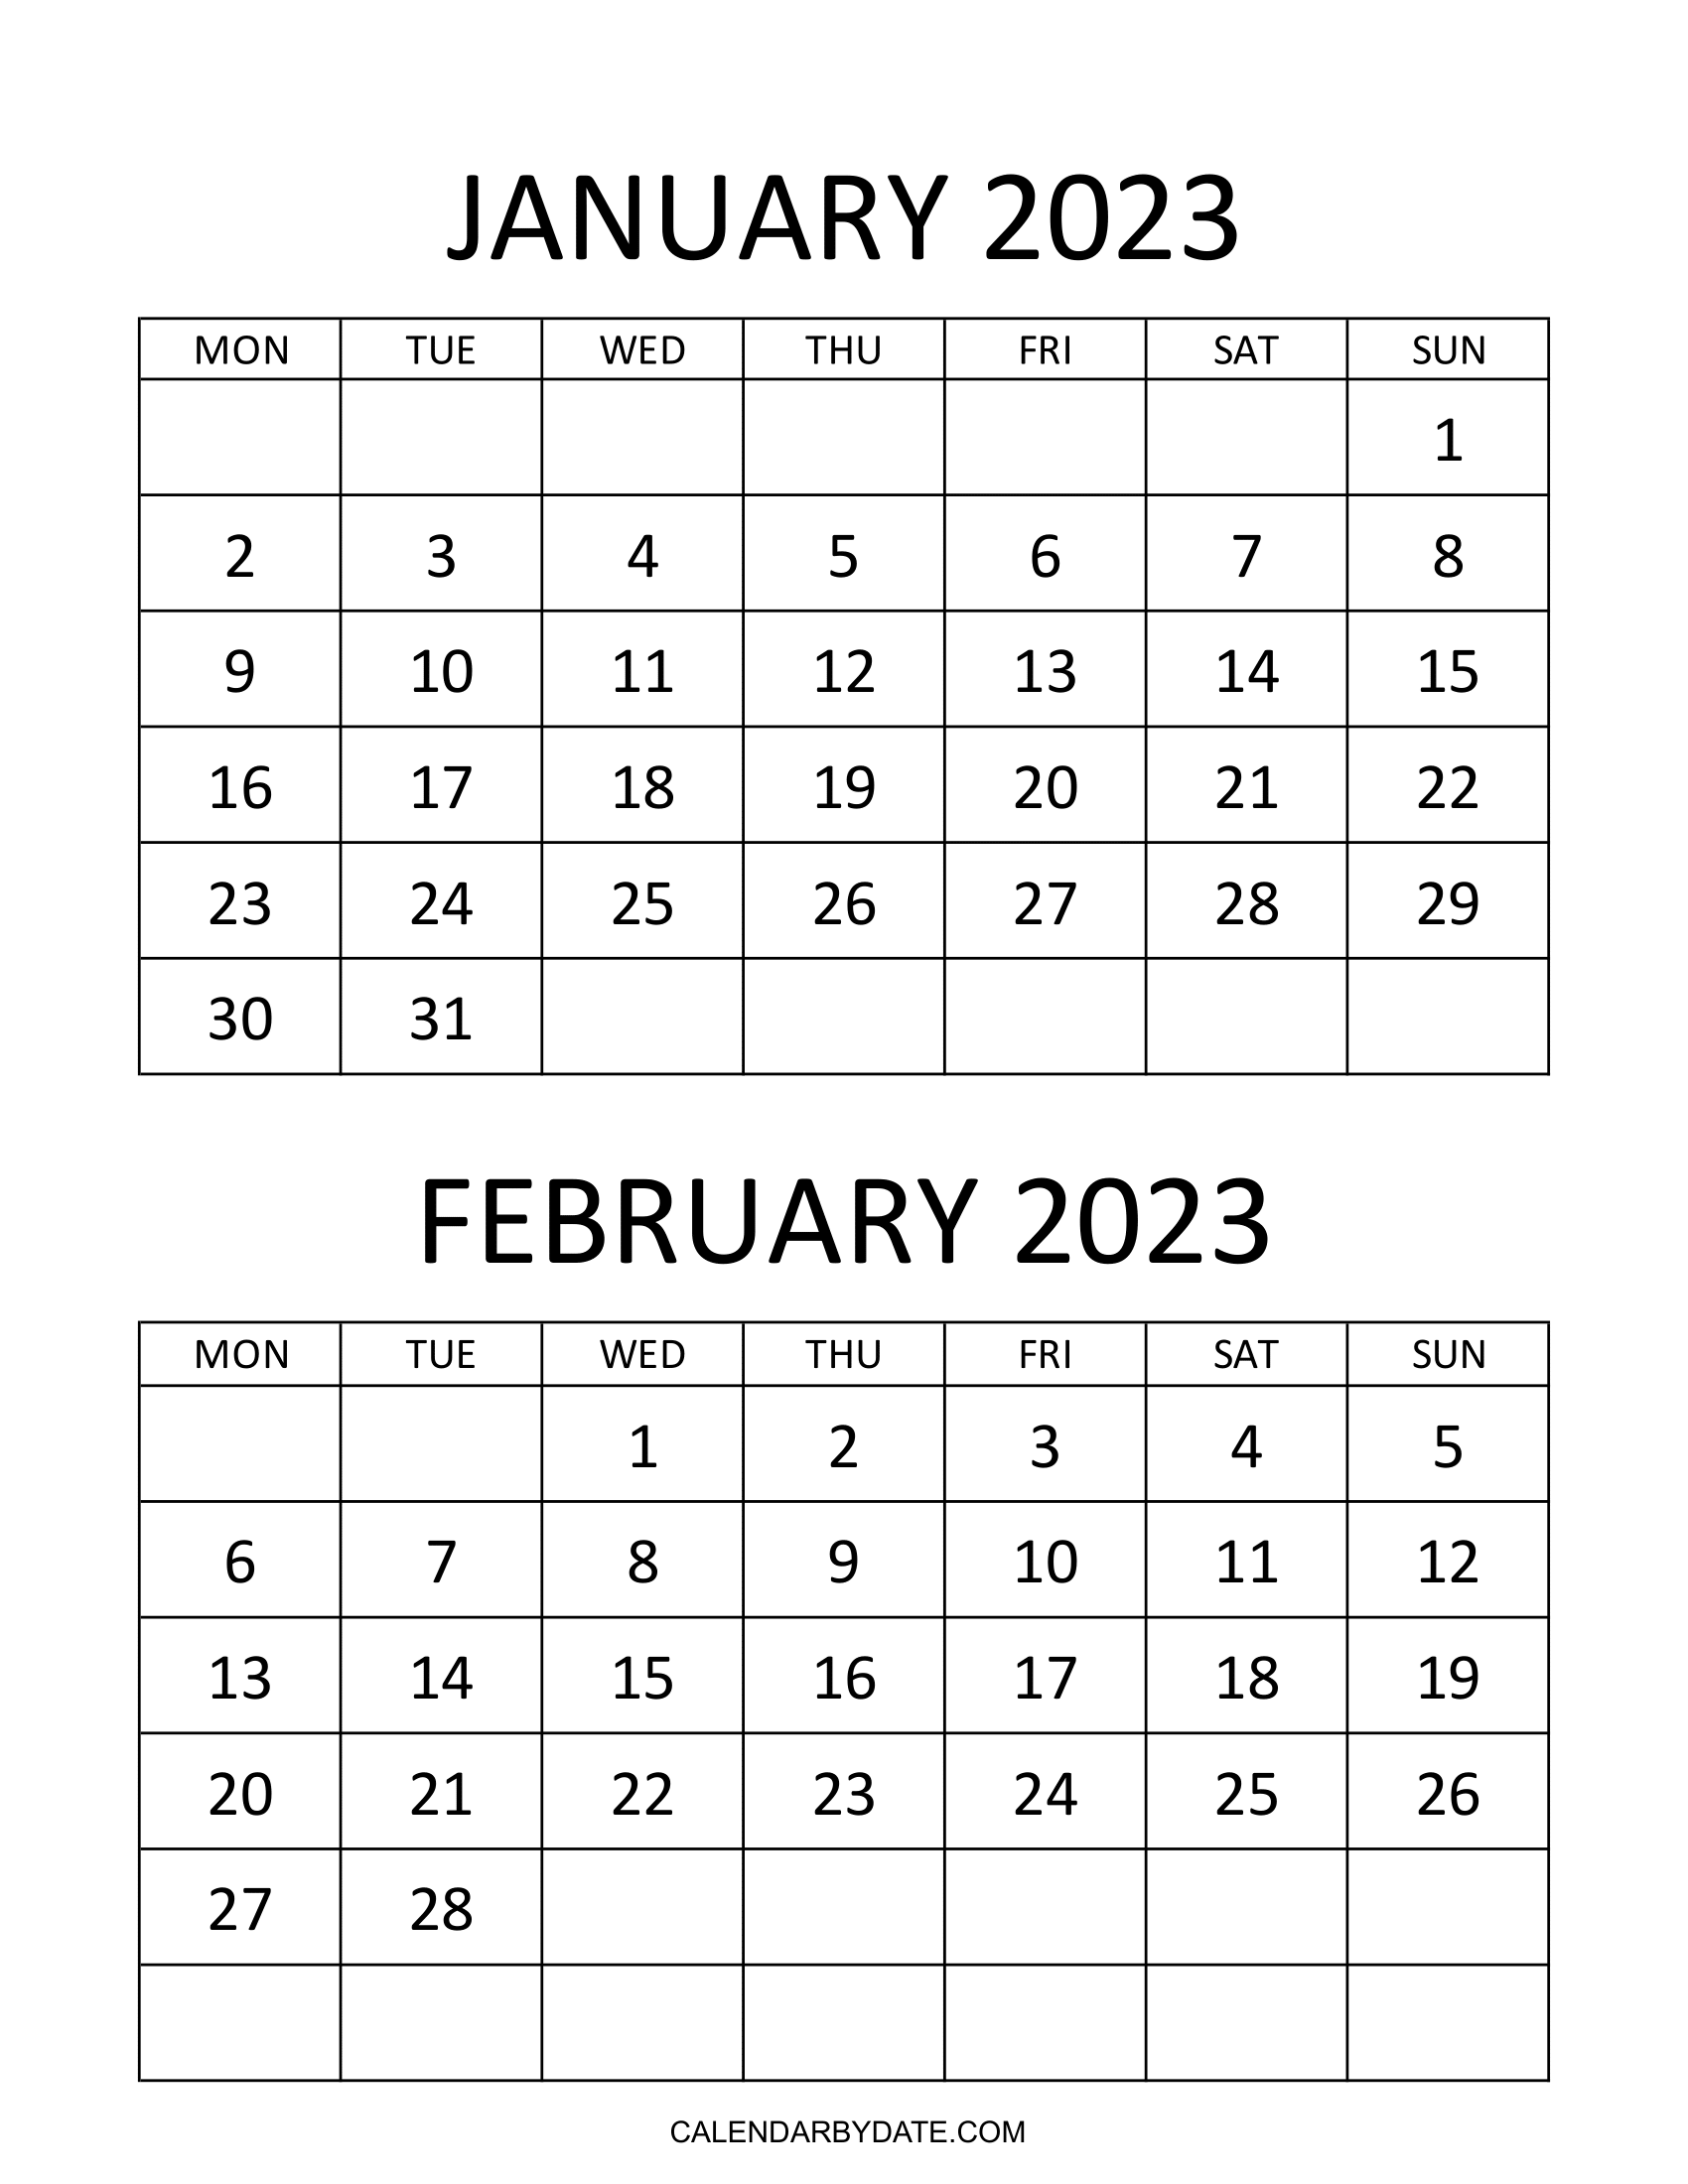 Customize and Print January February 2023 Calendar Template on One Page with Weekdays starting from Monday.